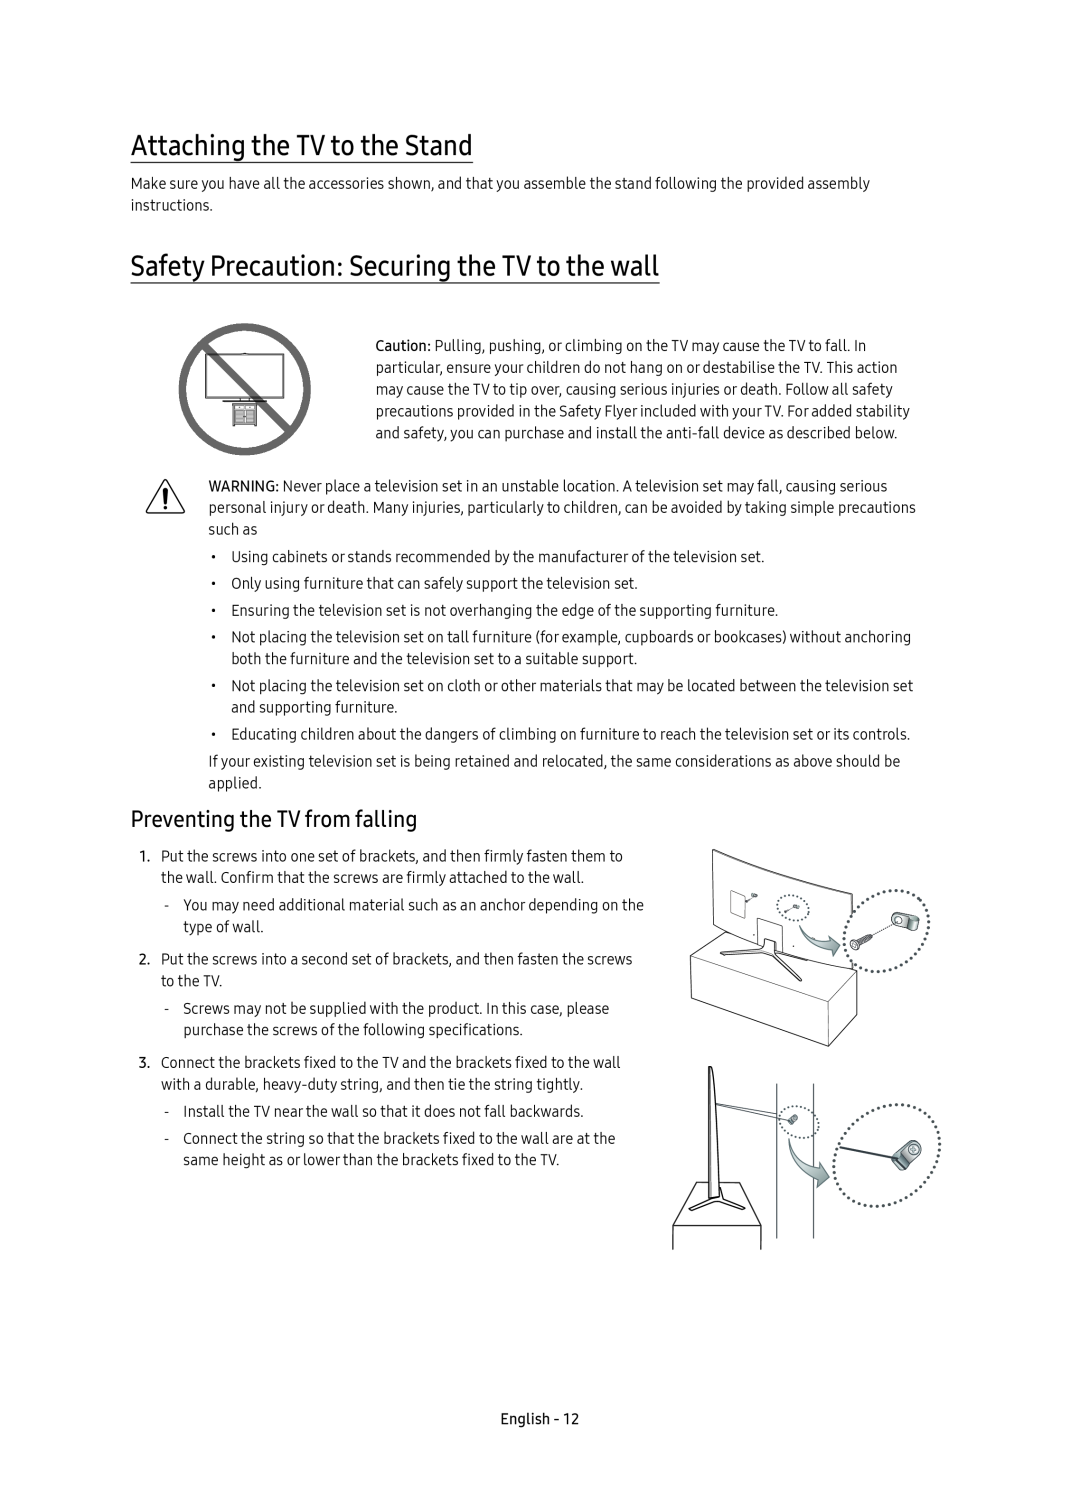 Samsung UE65KU6500UXZT manual Attaching the TV to the Stand, Safety Precaution Securing the TV to the wall, English 